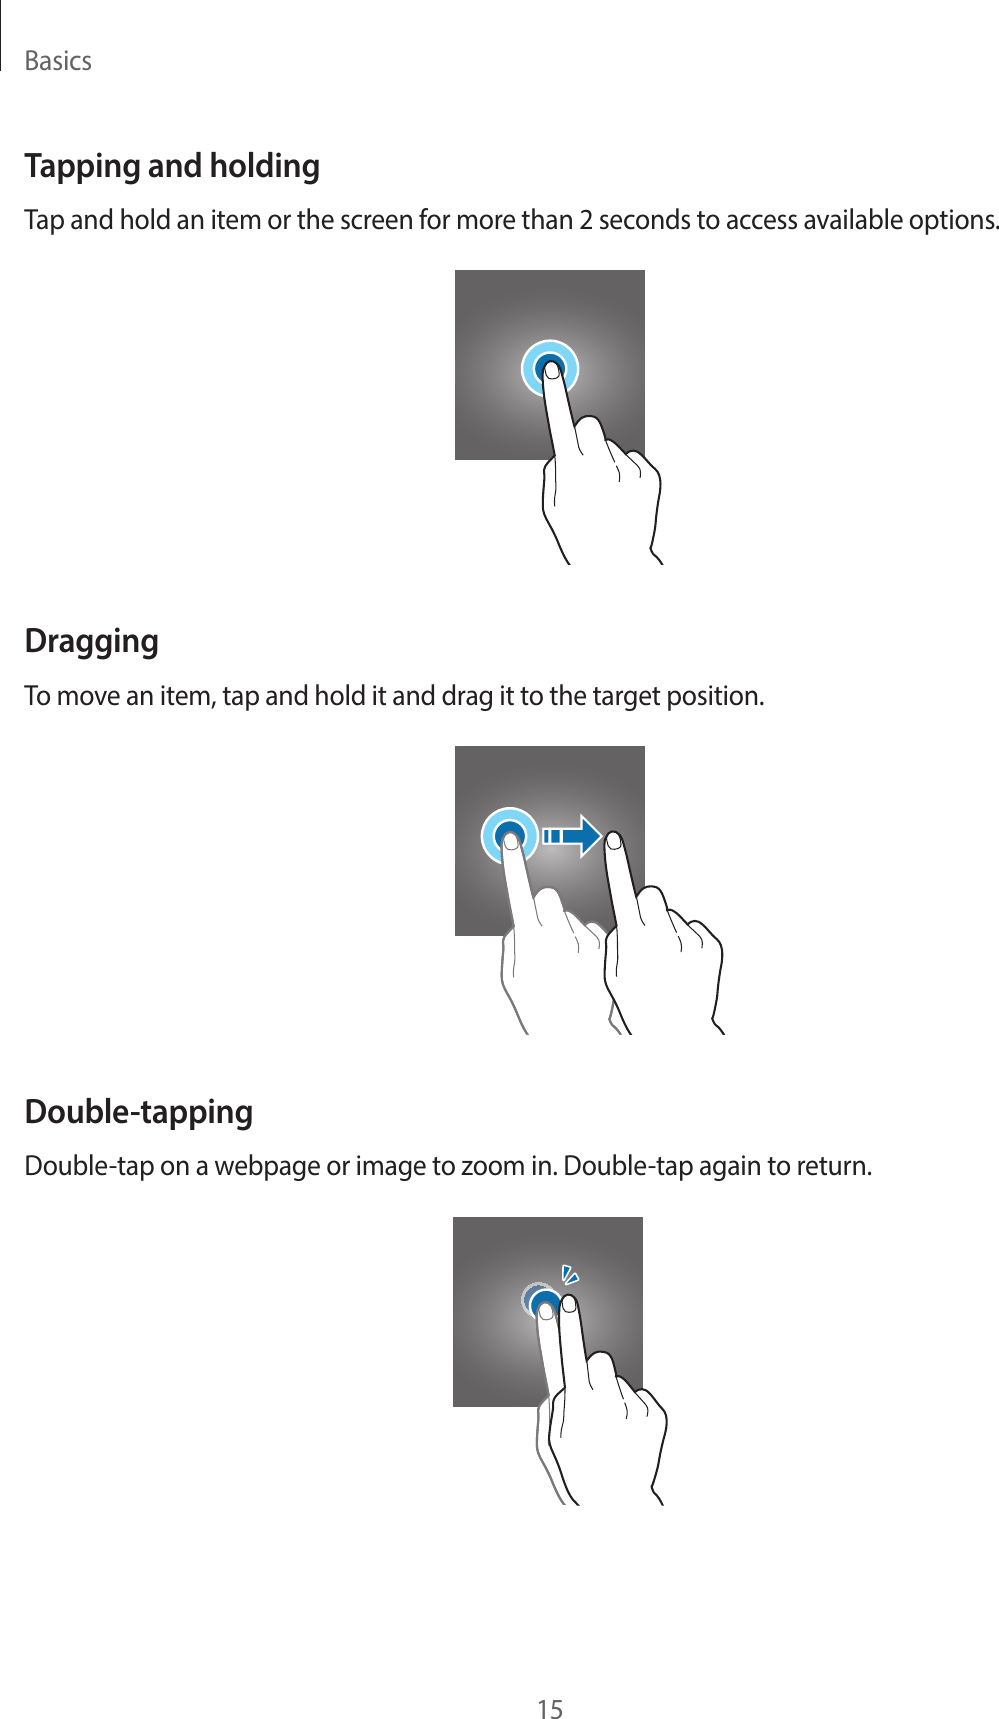 Basics15Tapping and holdingTap and hold an item or the screen for more than 2 seconds to access available options.DraggingTo move an item, tap and hold it and drag it to the target position.Double-tappingDouble-tap on a webpage or image to zoom in. Double-tap again to return.